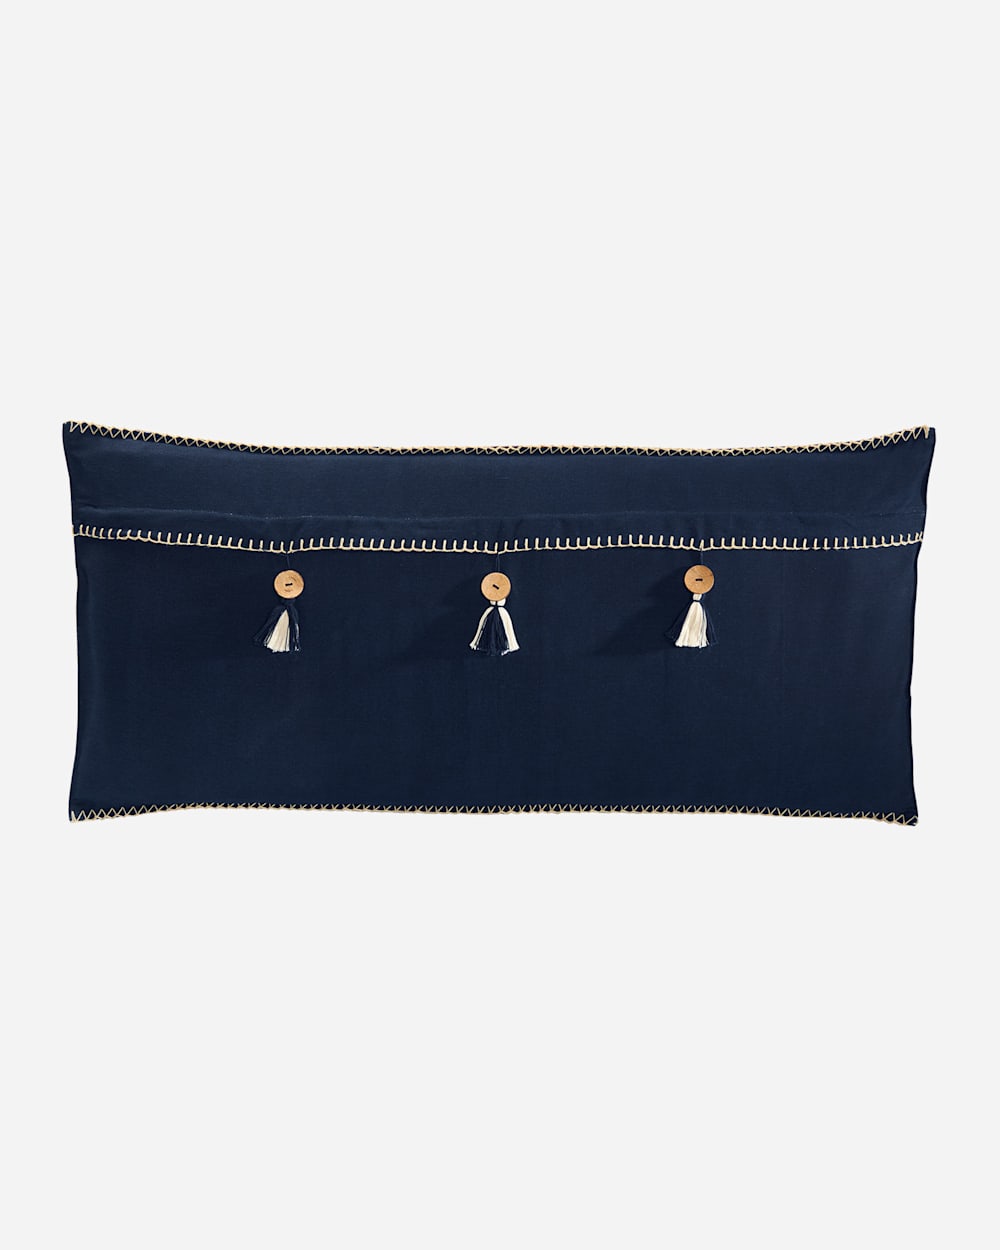 ADDITIONAL VIEW OF HARDING HUG PILLOW IN NAVY MULTI image number 2